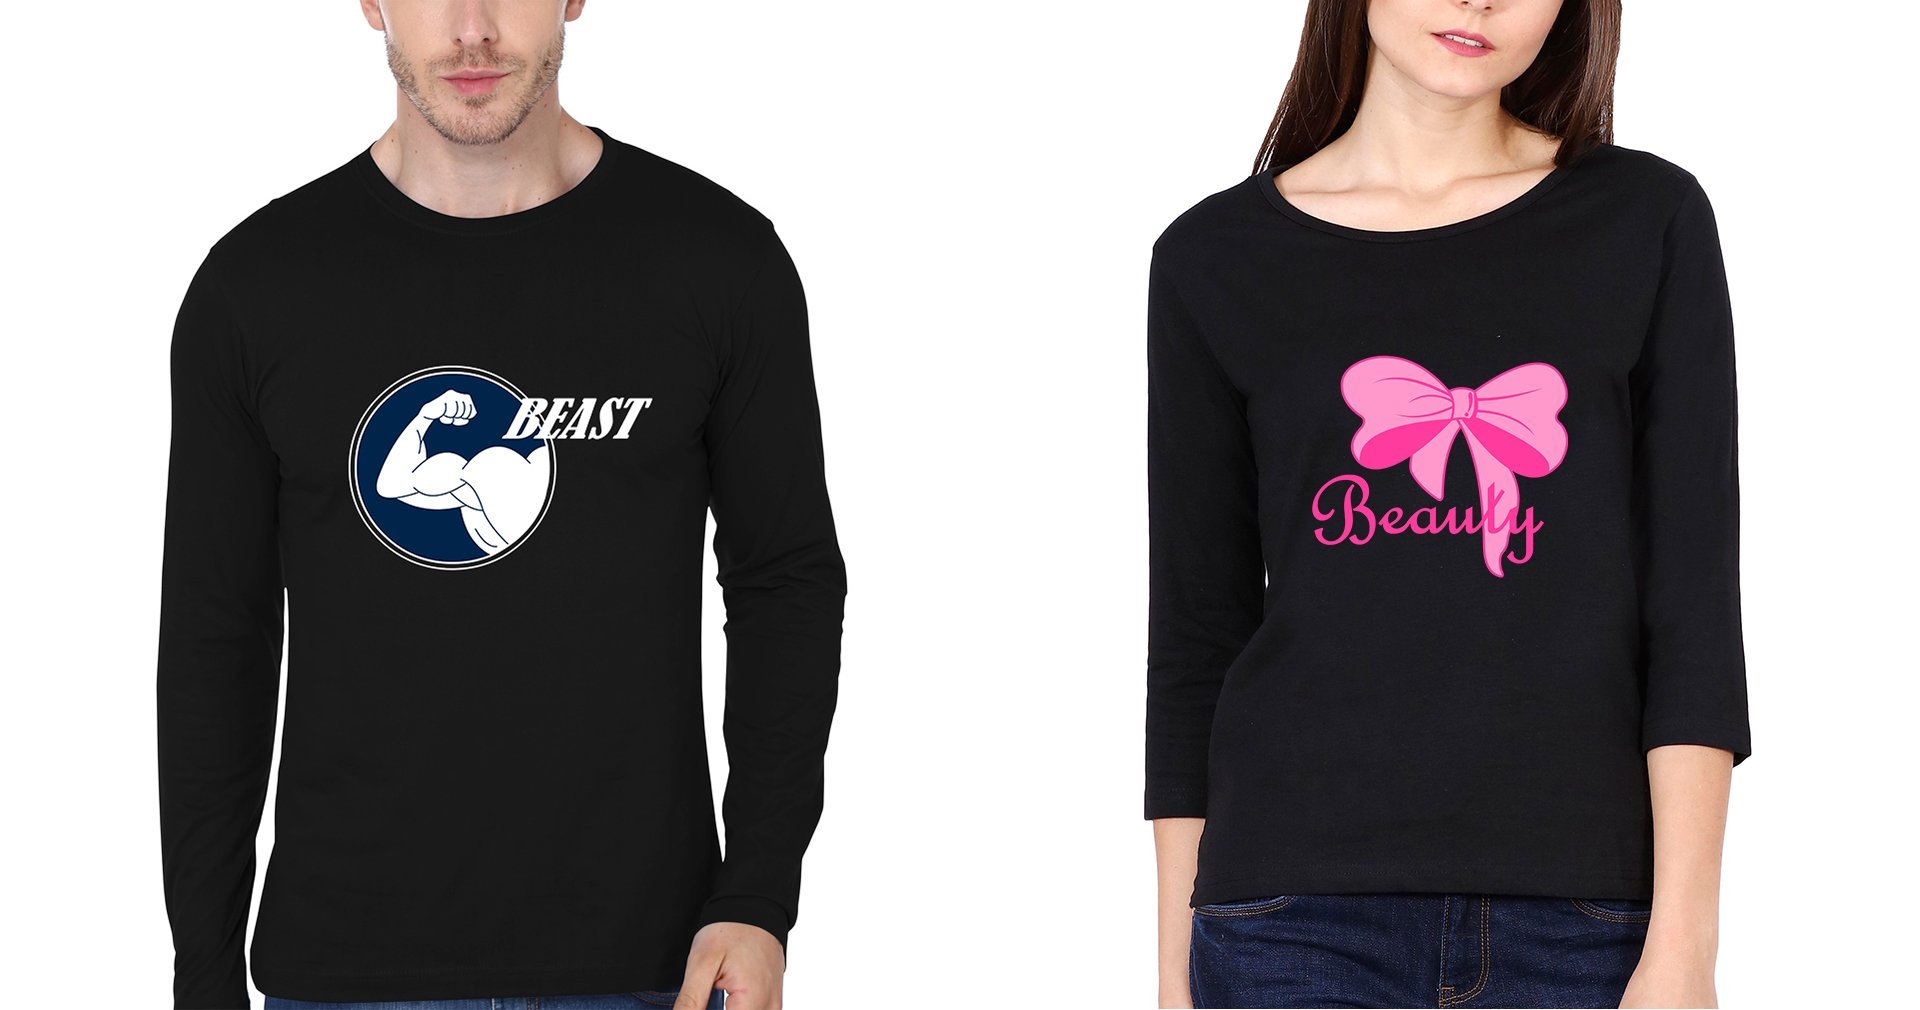 Beast Beauty Couple Full Sleeves T-Shirts -FunkyTradition - FunkyTradition